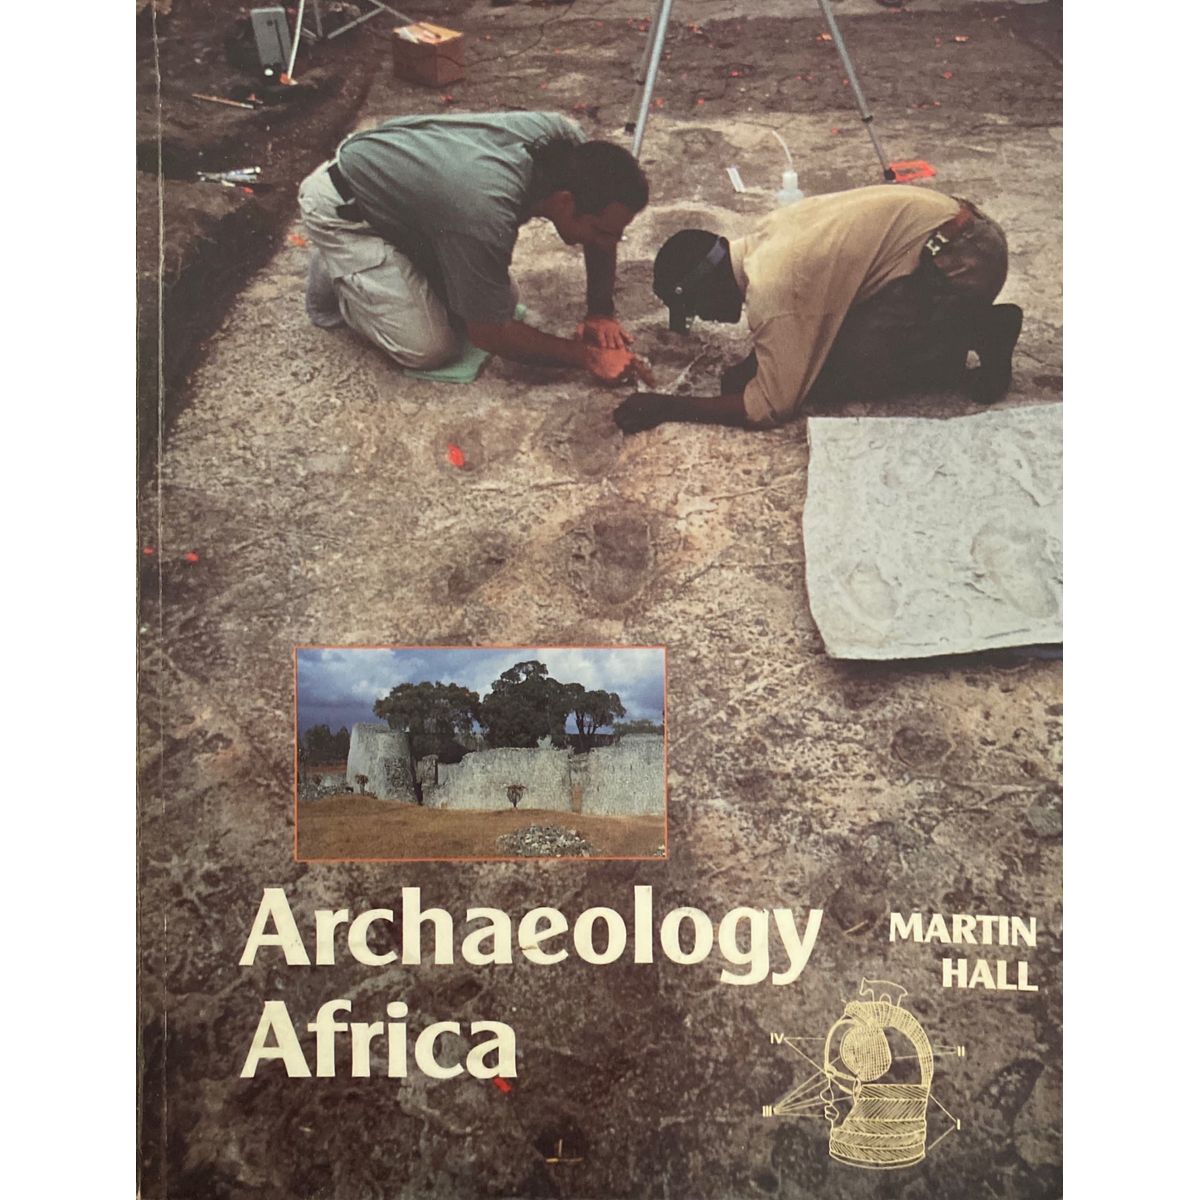 ISBN: 9780864863027 / 0864863020 - Archaeology Africa by Martin Hall [1996]